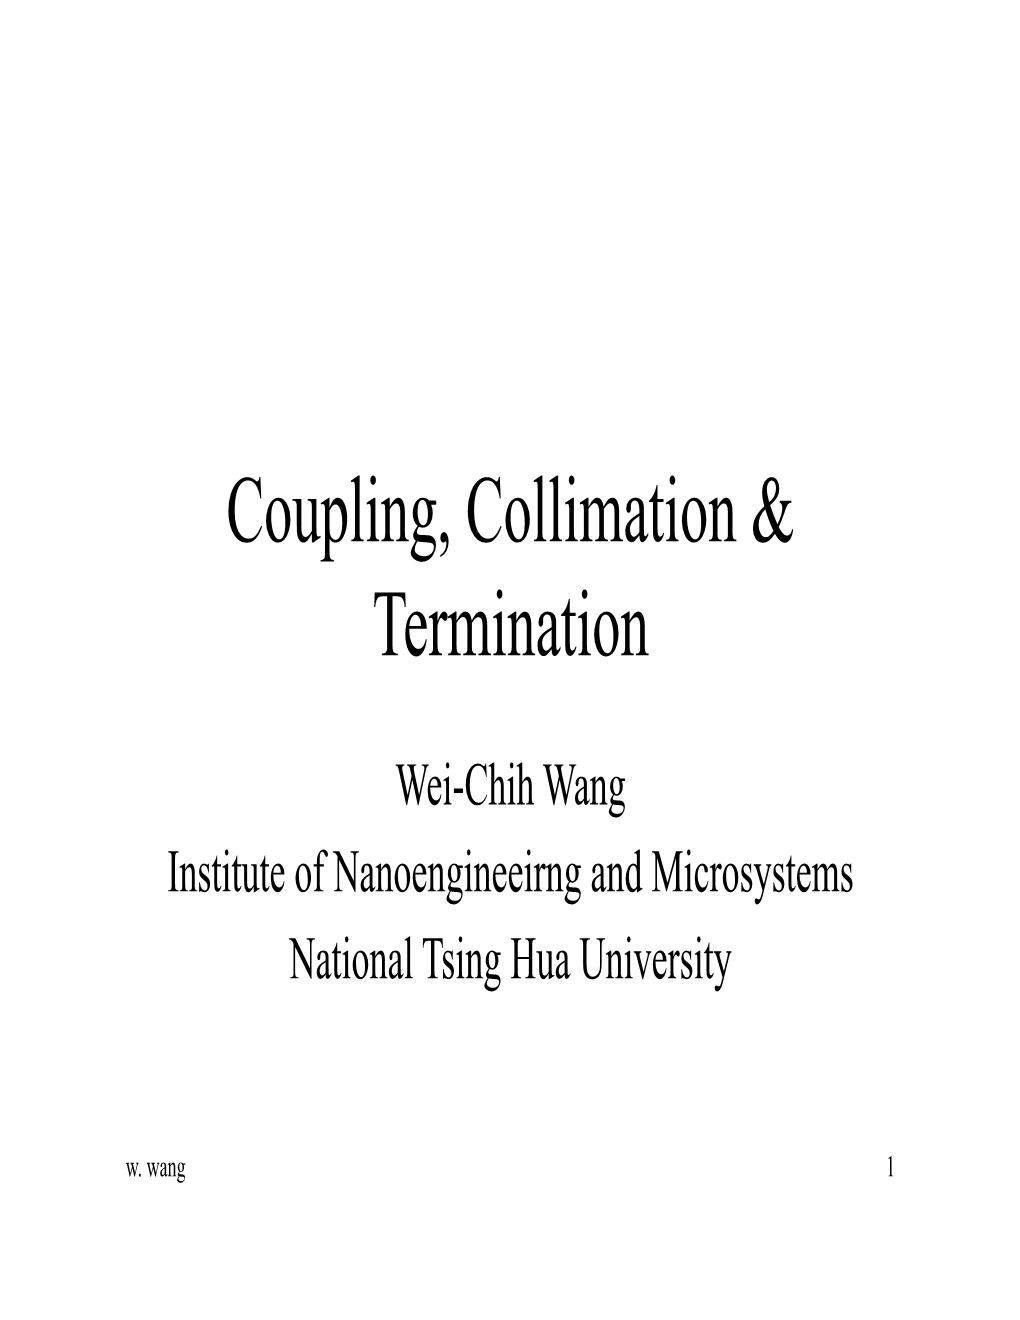 Coupling, Collimation & Termination